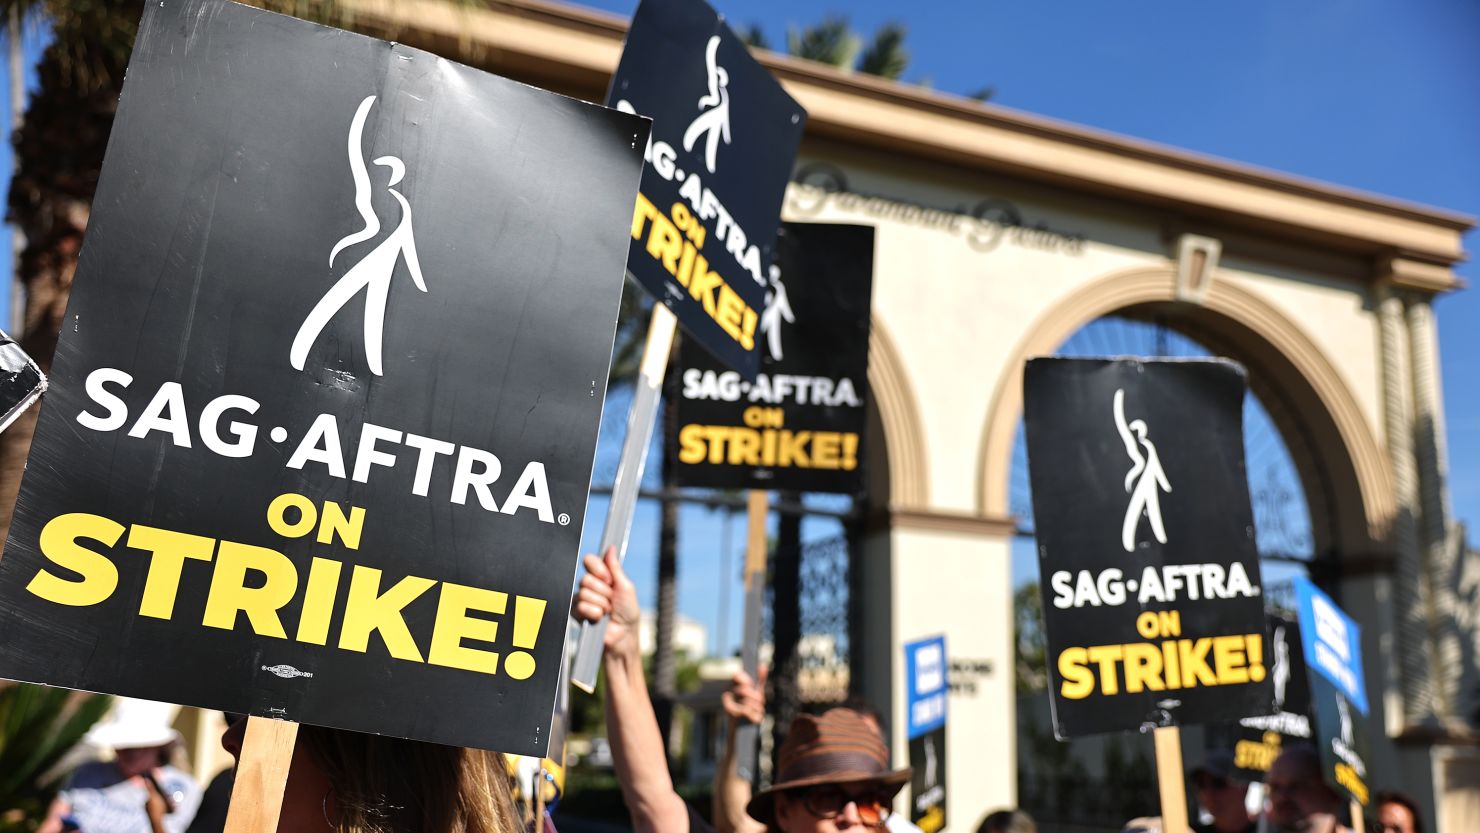 SAG-AFTRA member Caryn West (C) and other members and supporters picket outside Paramount Studios on day 113 of their strike against the Hollywood studios on November 3, 2023 in Los Angeles, California. Contract negotiations between the actors union and the Alliance of Motion Picture and Television Producers (AMPTP) are continuing in the strike which began on July 14.